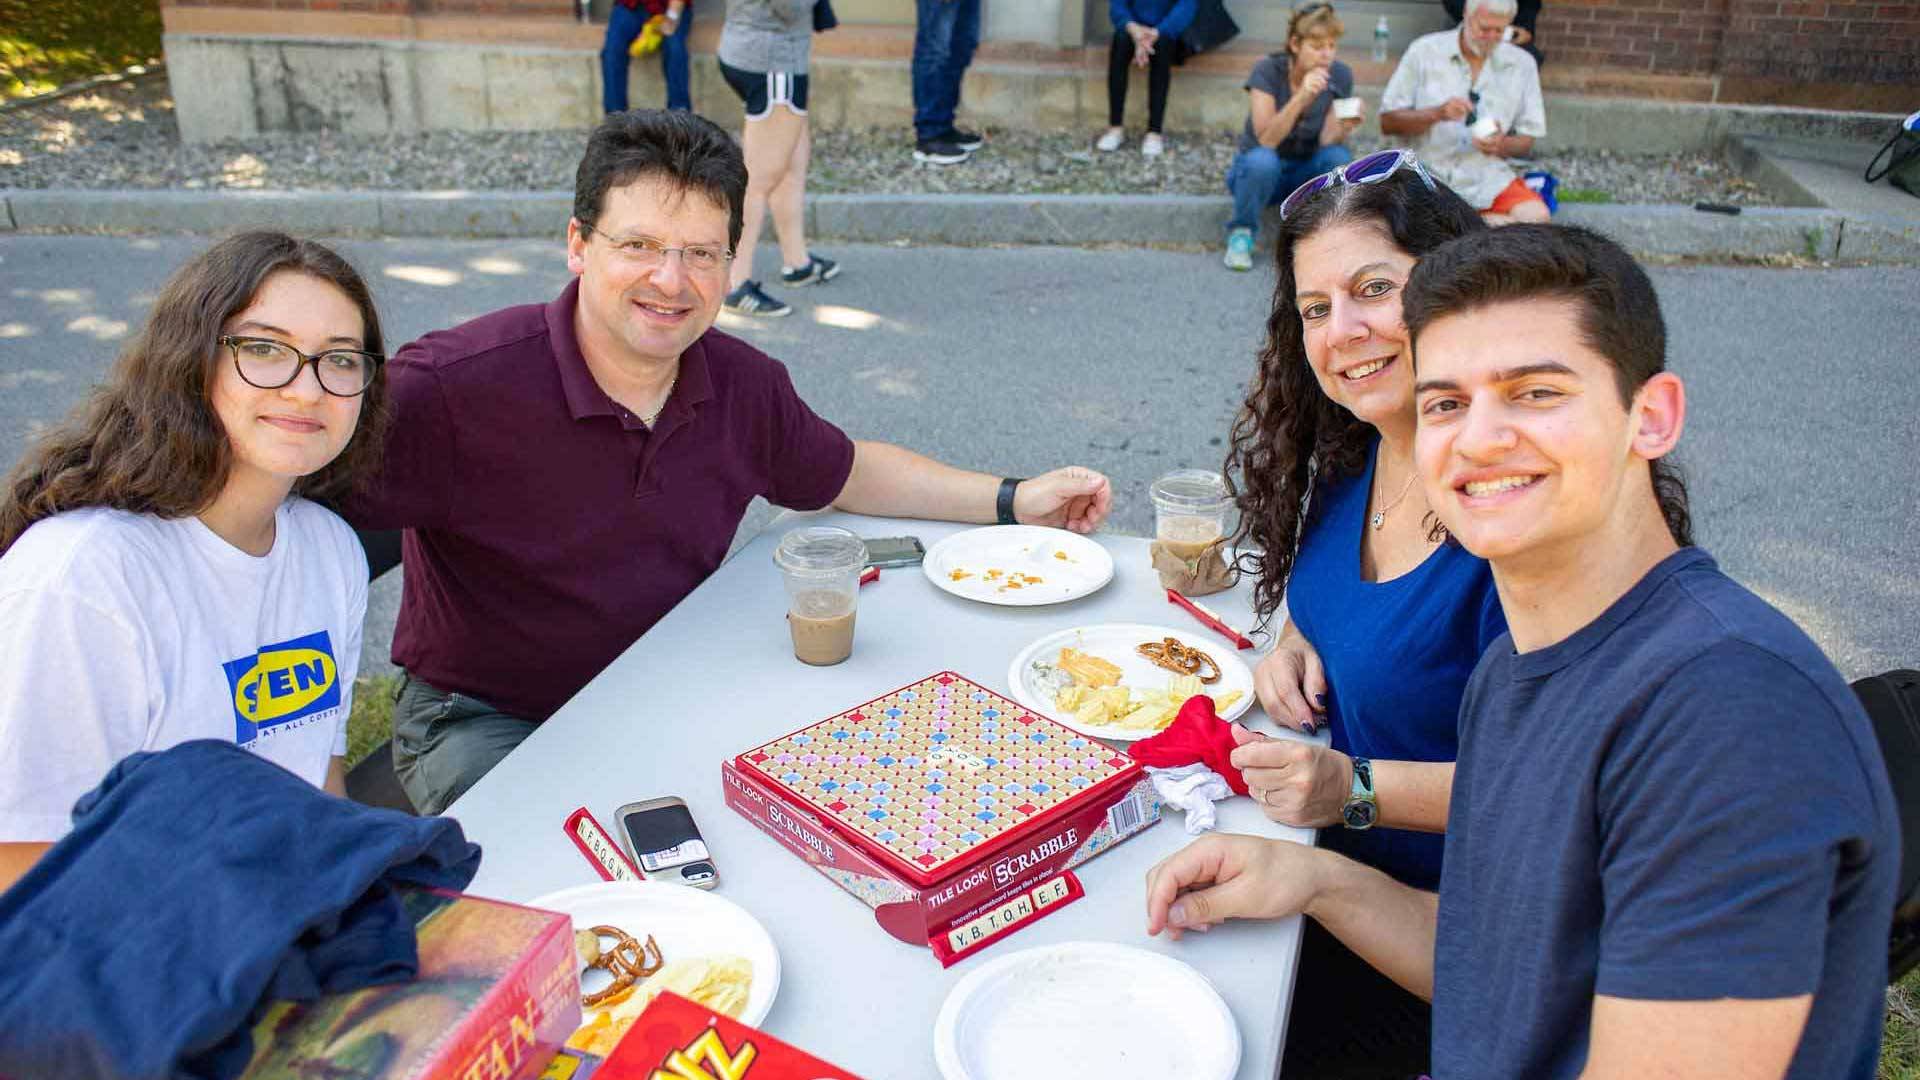 A family eats and plays games together at a picnic table